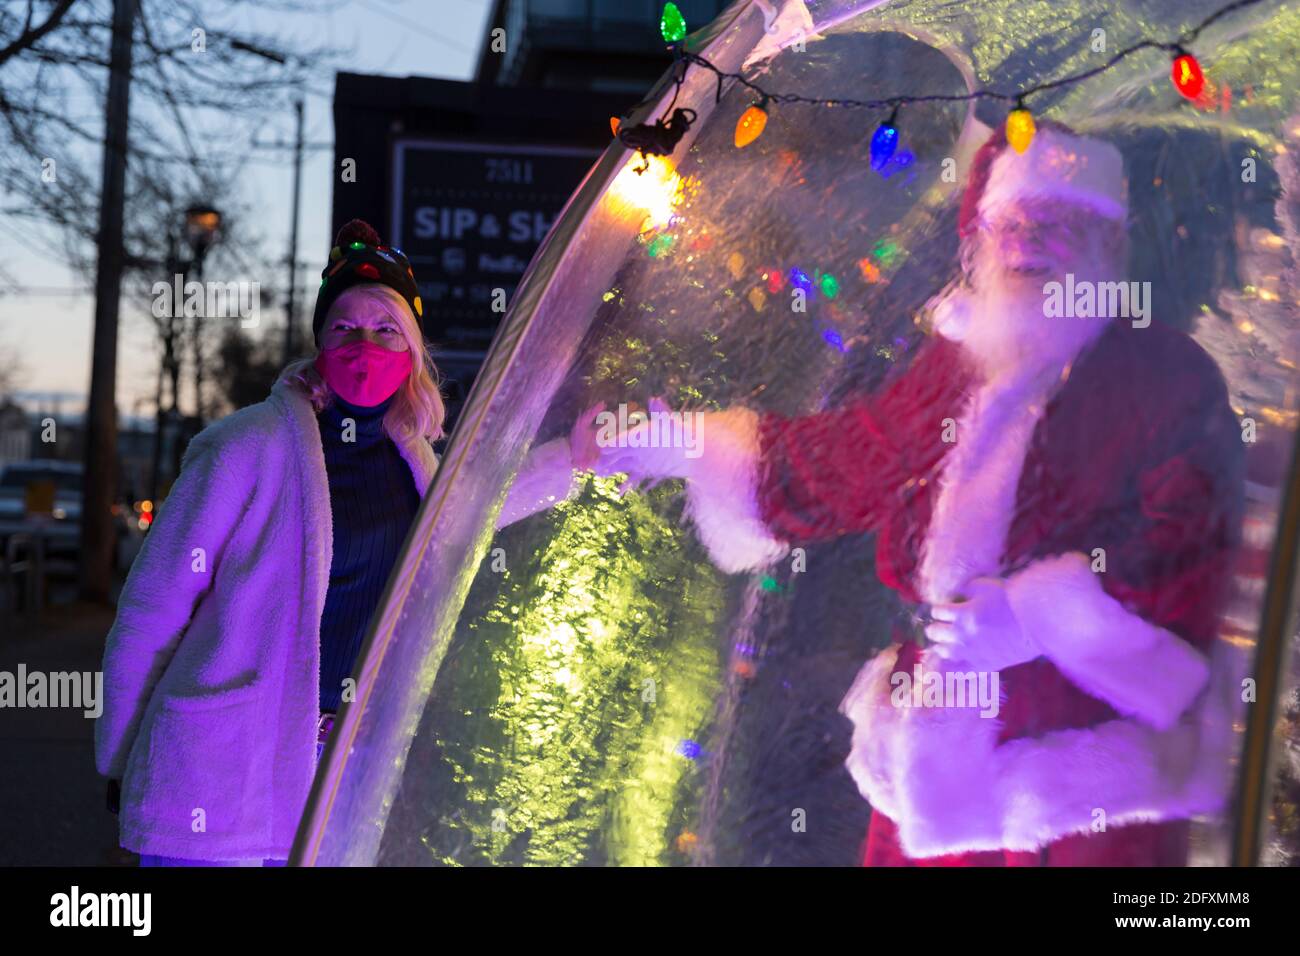 Seattle, Washington, USA. 6th December, 2020. Dan Kemmis, known as the Seattle Santa, poses for a photo with Kris Bennett from within a protective plastic bubble in Seattle’s Greenwood neighborhood. Unable to schedule private events due to the coronavirus pandemic, Kemmis is making physically distanced public appearances with some donations benefiting local homeless shelters. Credit: Paul Christian Gordon/Alamy Live News Stock Photo